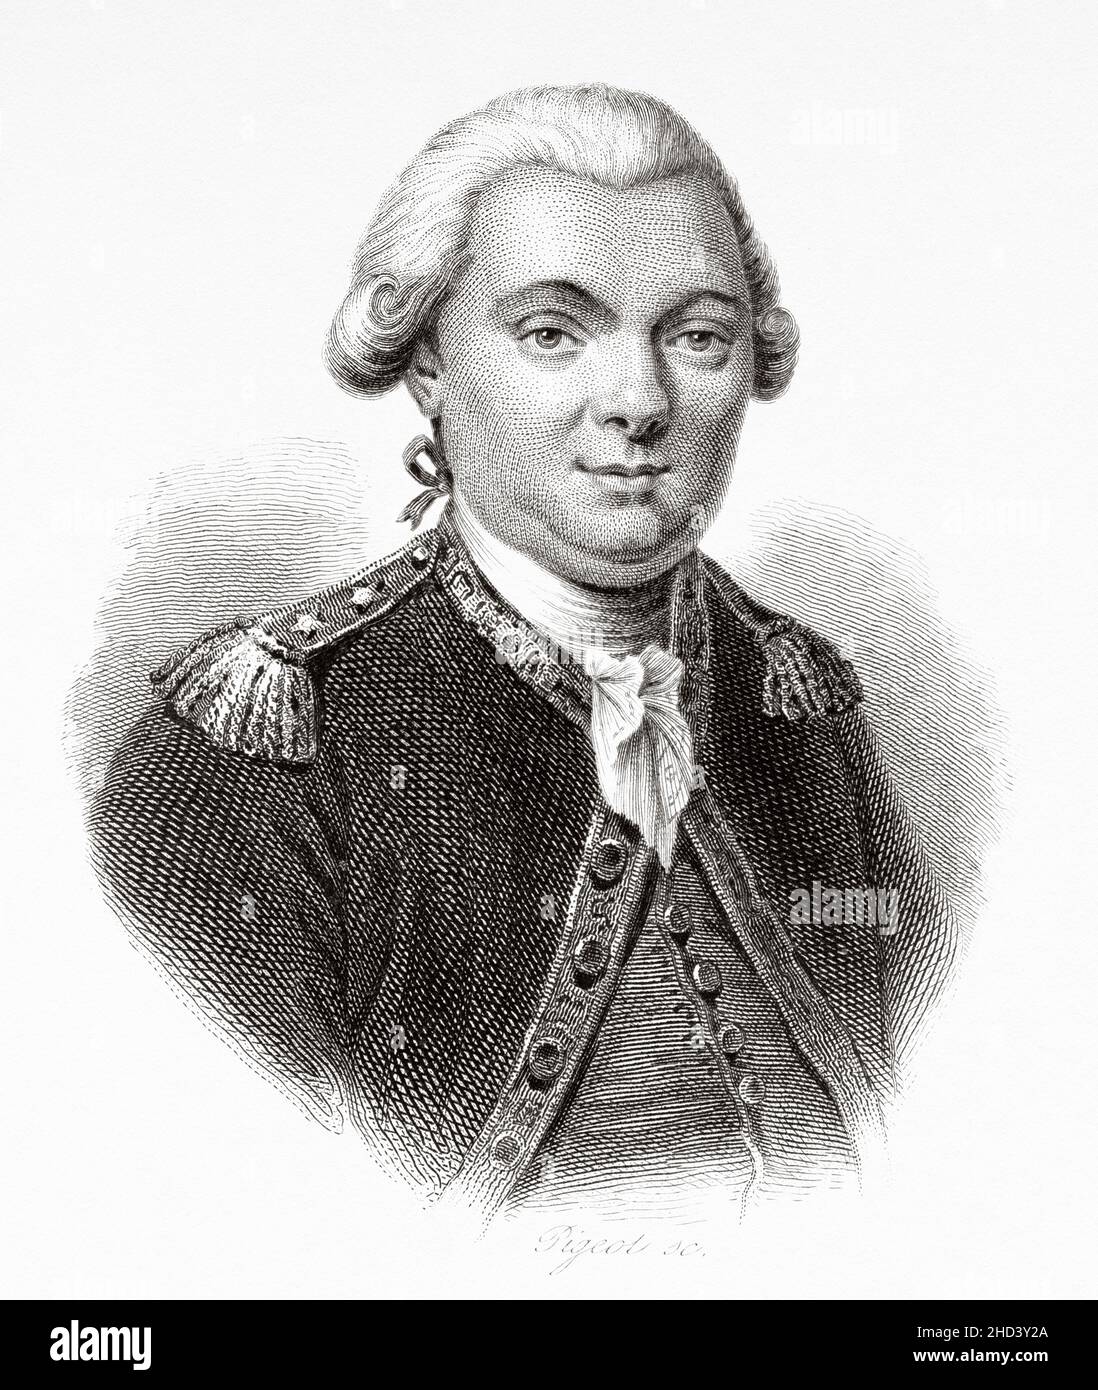 Jean Francois de Galaup (1741-1788) comte de Lapérouse, was a French naval officer and explorer, wrecking on the reefs of Vanikoro in the Solomon Islands. France. Europe. Old 19th century engraved illustration from Portraits et histoire des hommes utile by Societe Montyon et Franklin 1837 Stock Photo